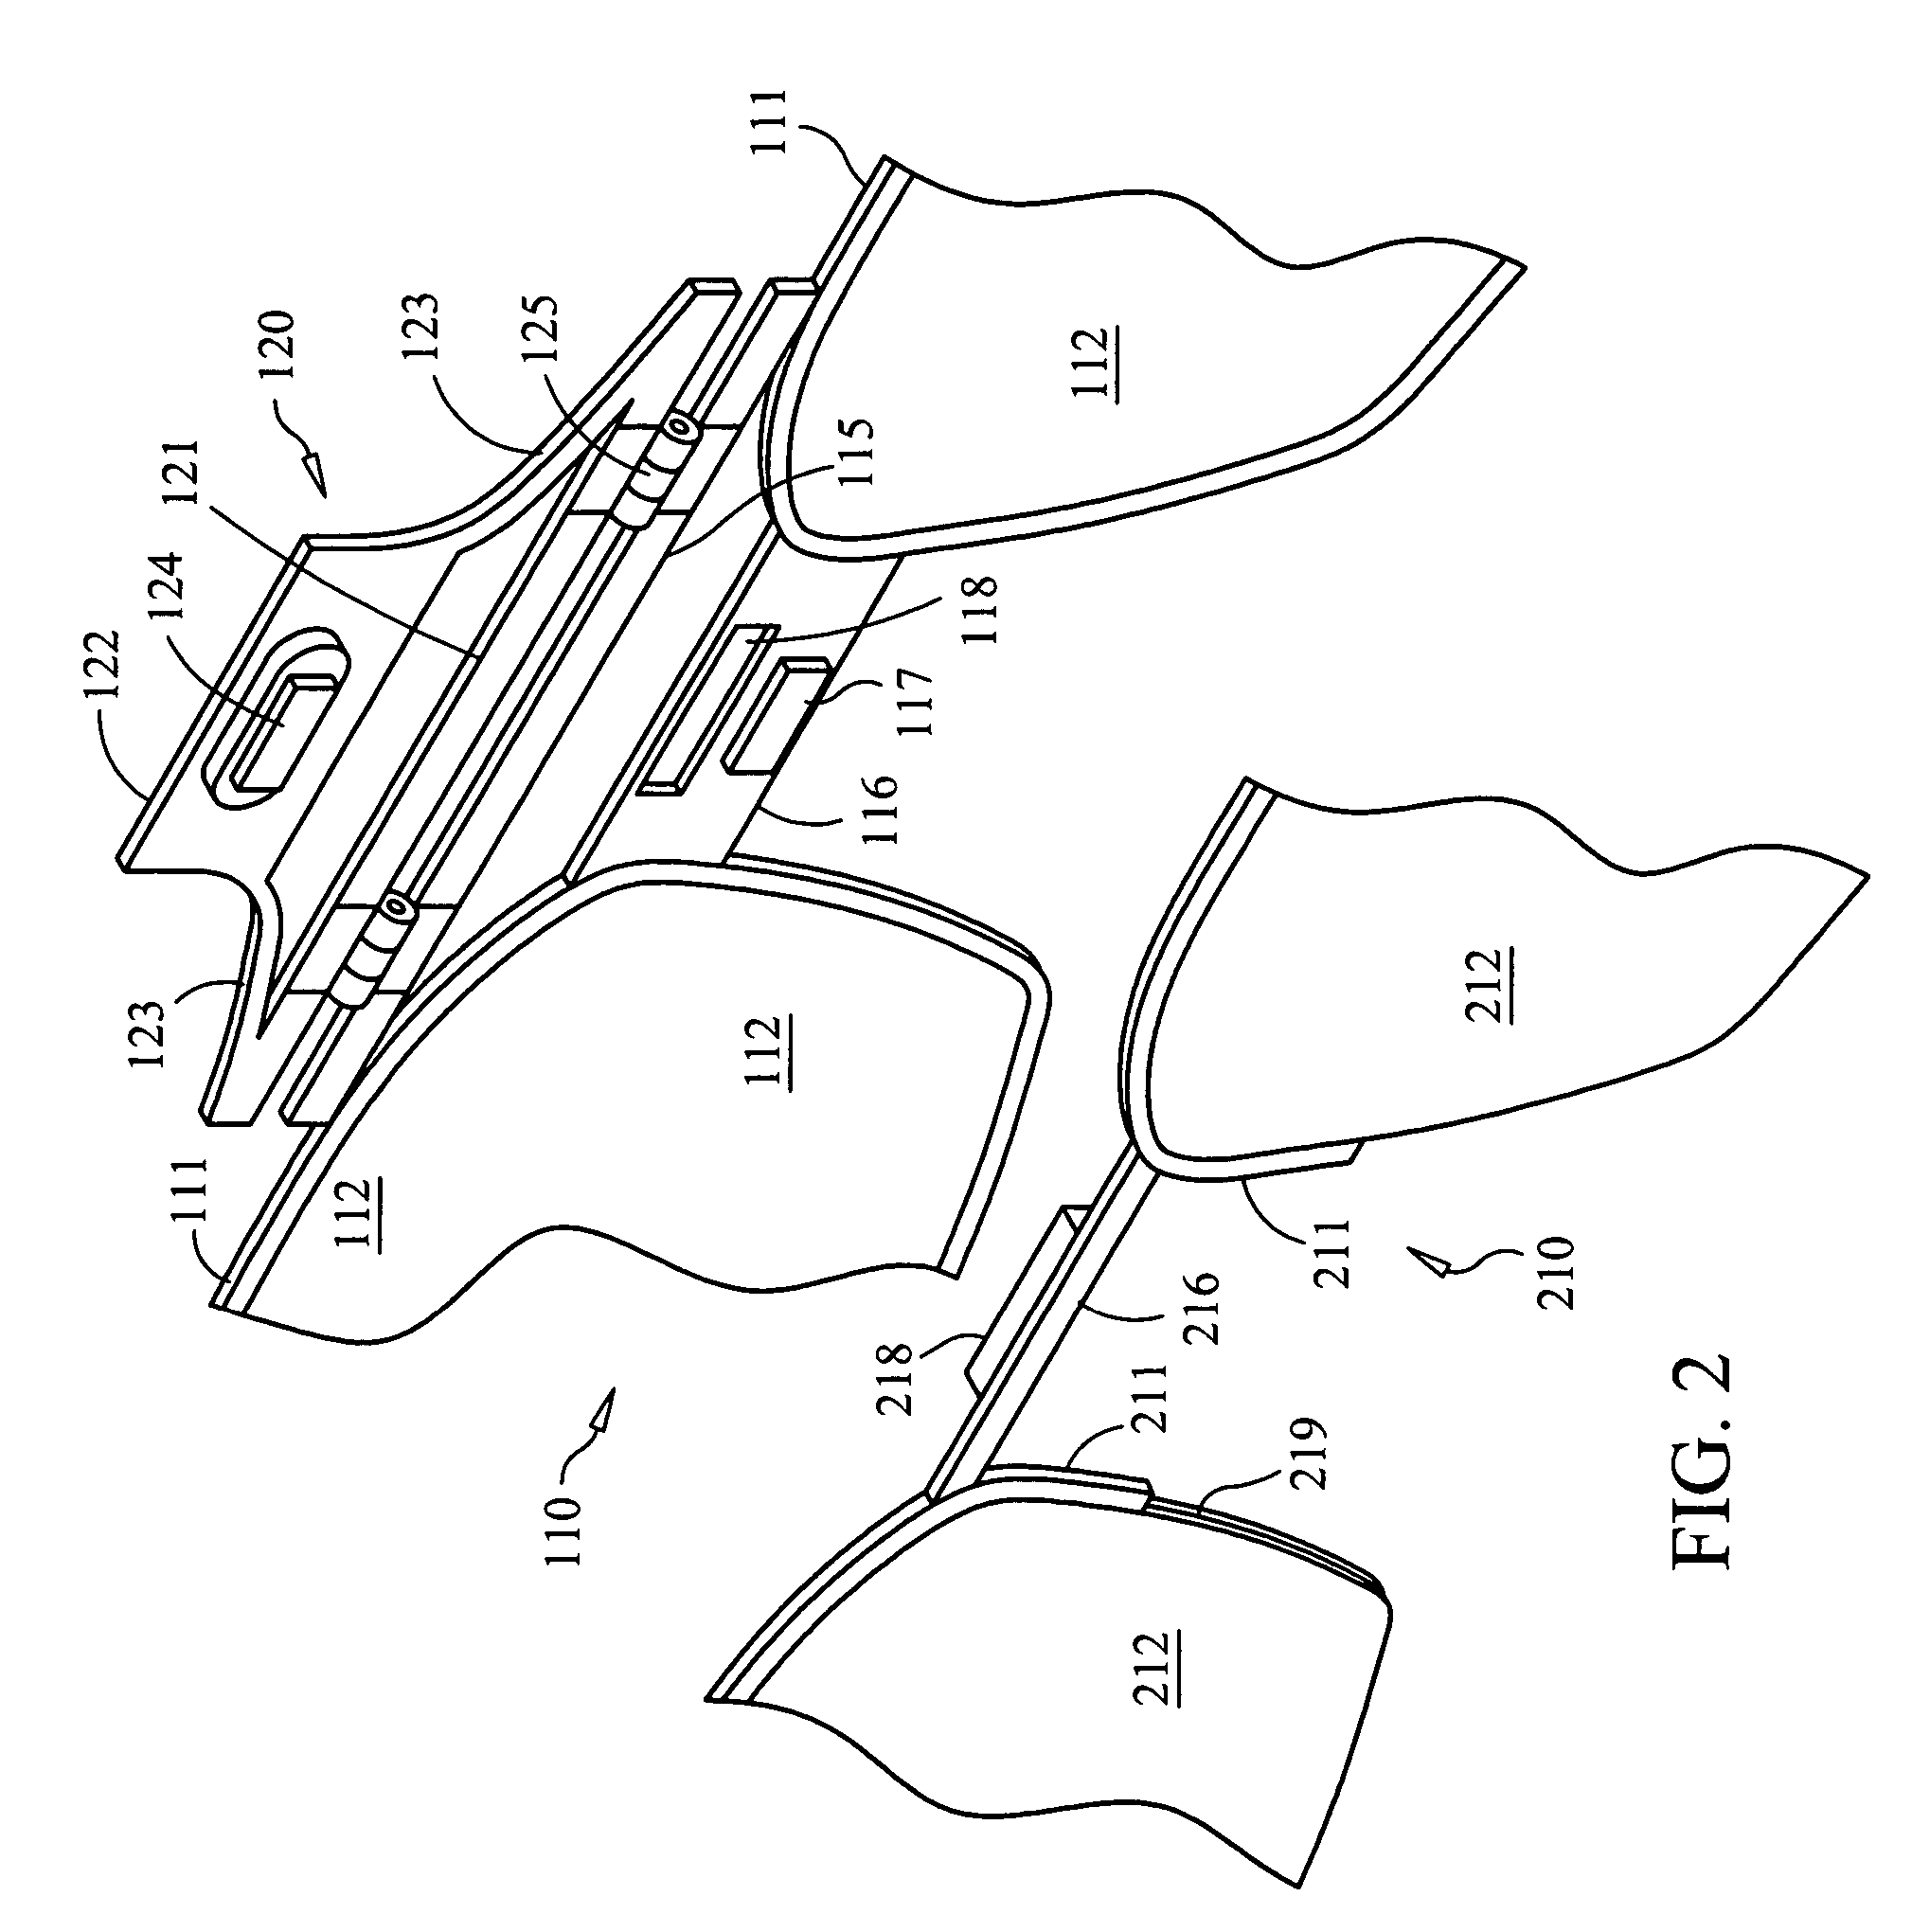 Eyeframe with interchangeable lenspieces held by magnetic closure and interchangeable lens system